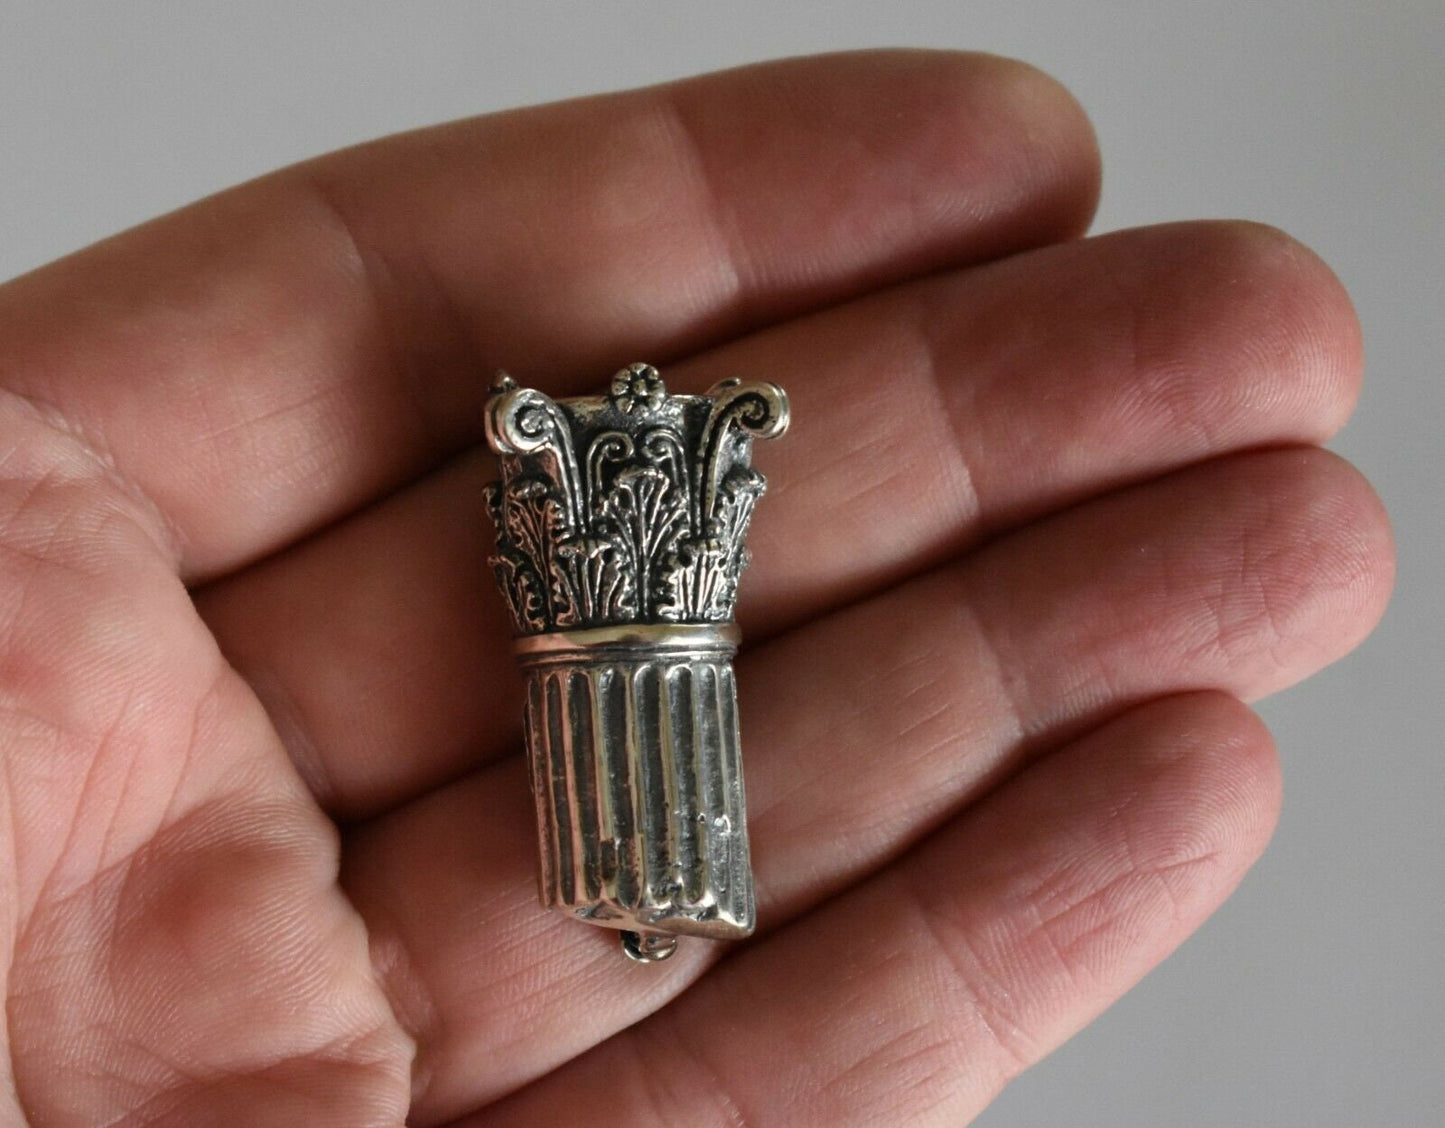 Corinthian Order - Column - Top Part - Acanthus  Leaves and Scrolls - Ancient Greek architecture - Brooch Pin - 925 Sterling Silver